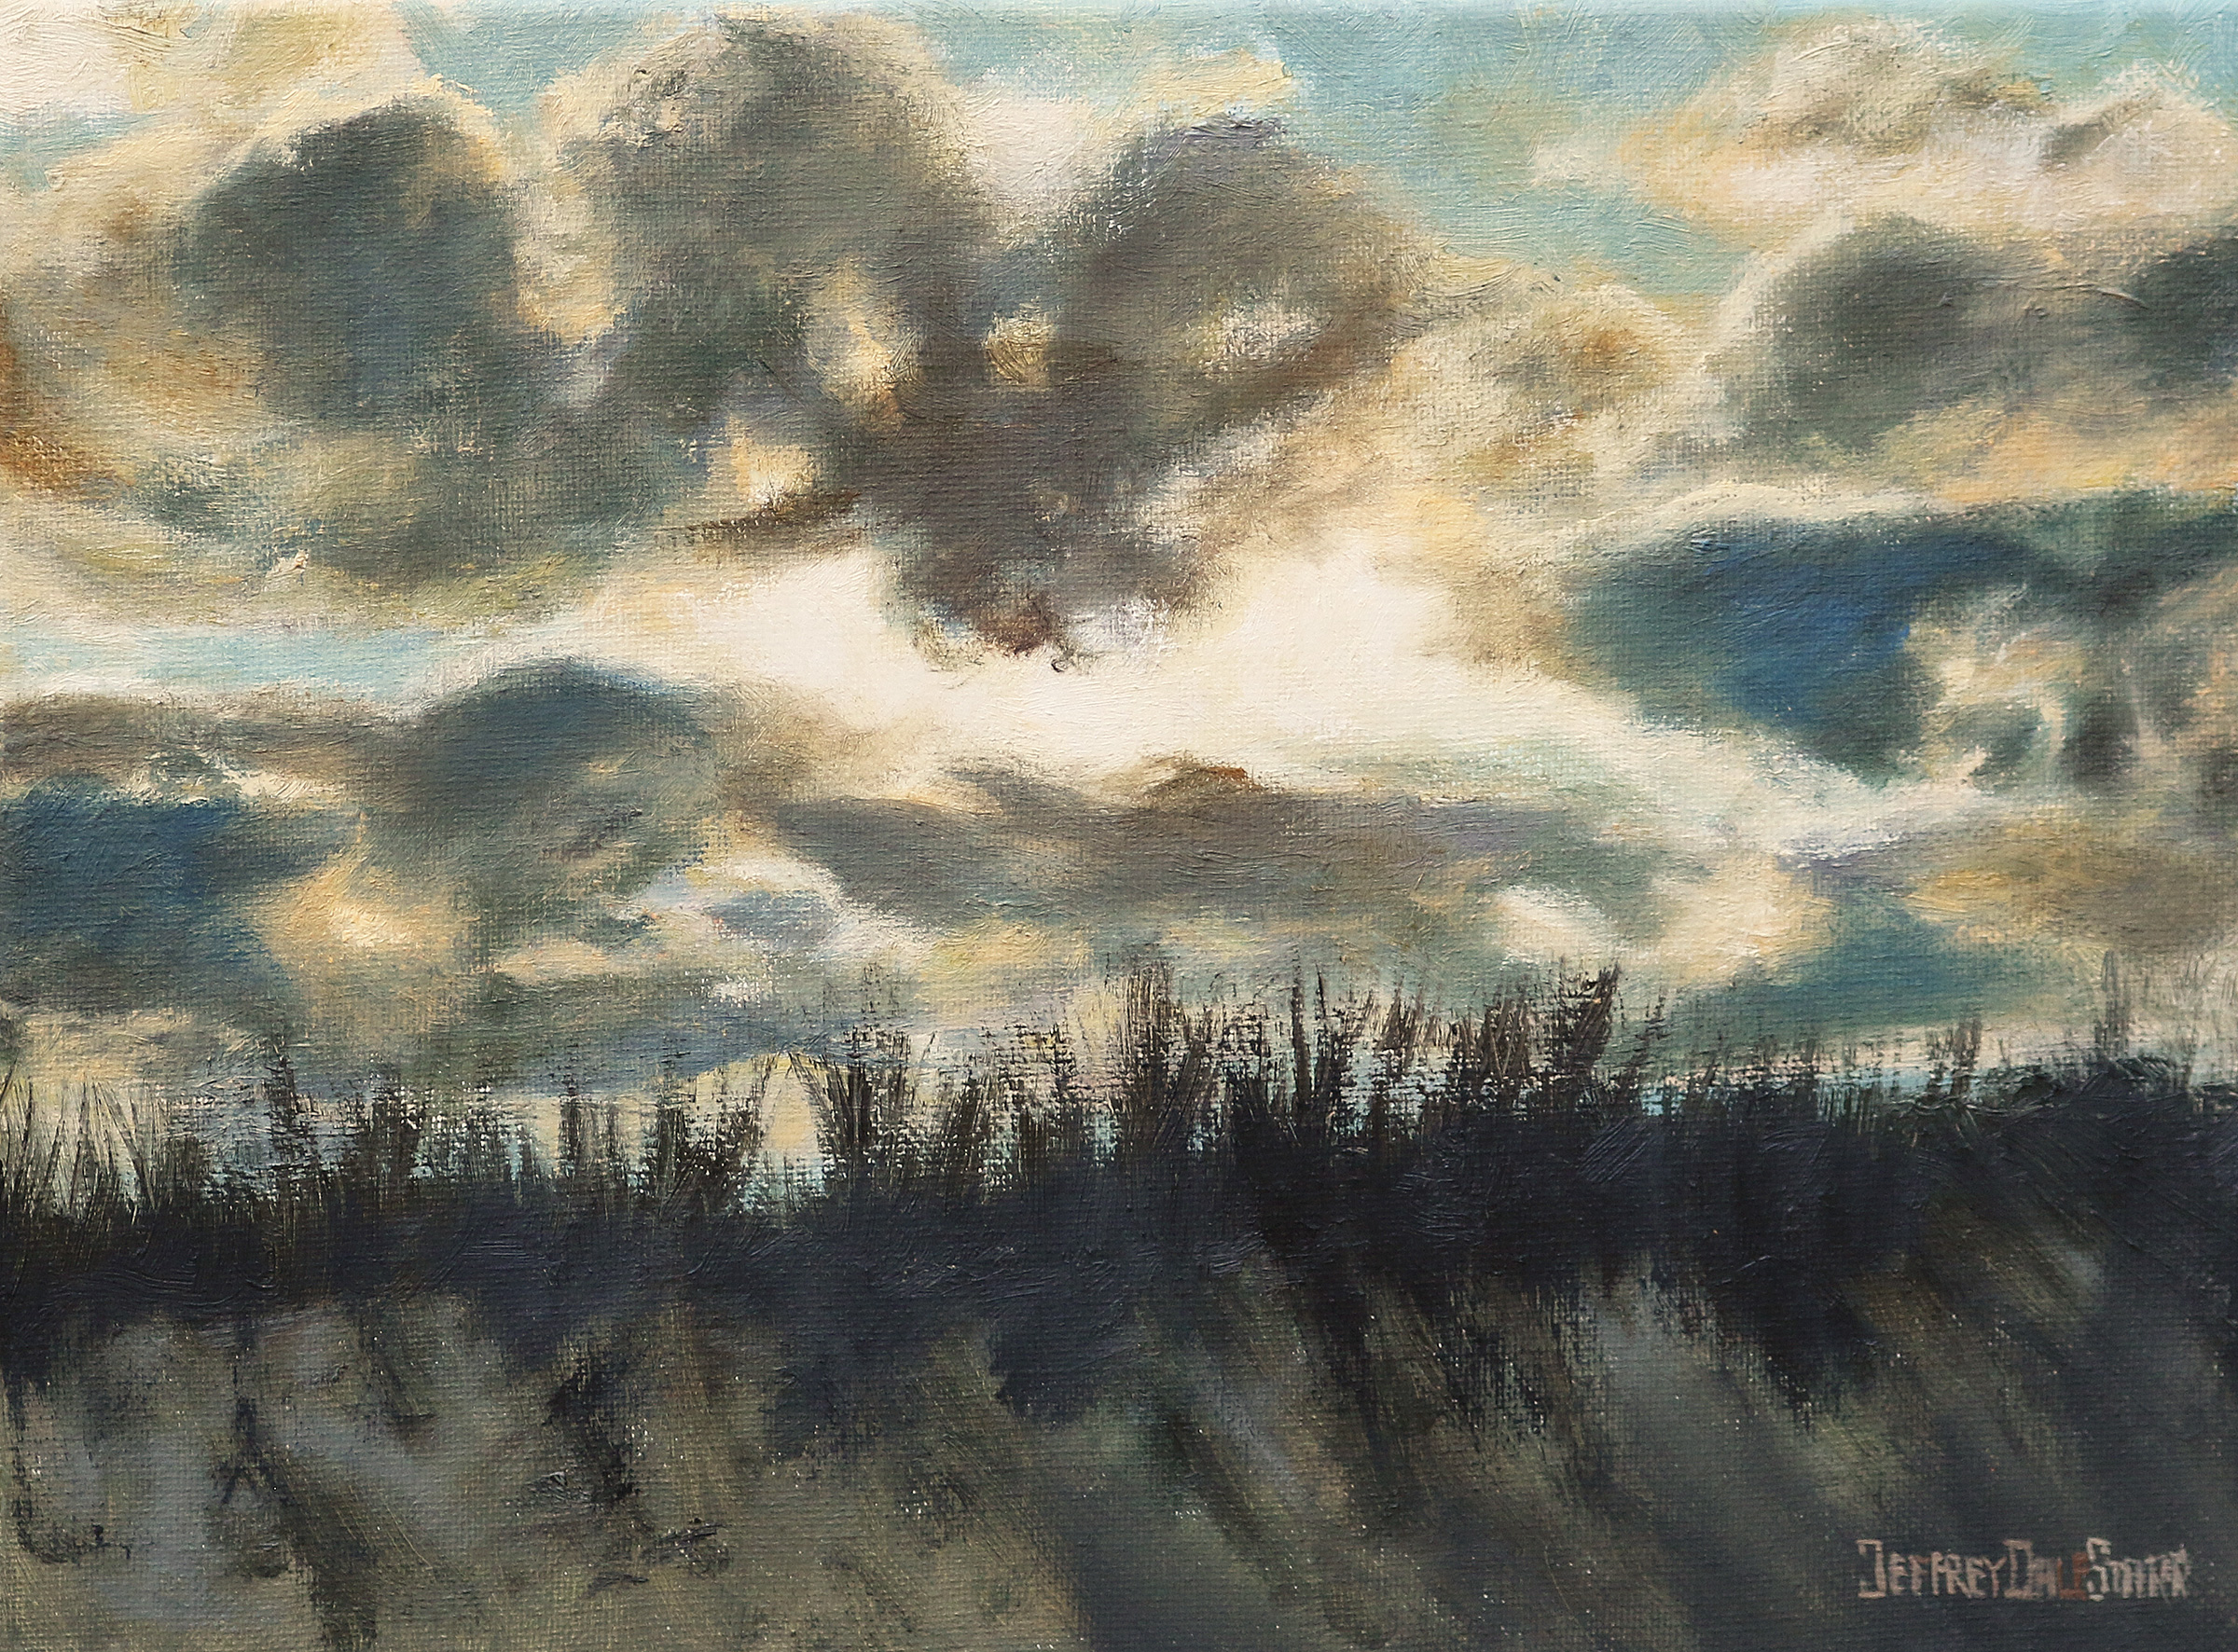 Oil painting "Majestic Sky Over Dowses Beach" by Jeffrey Dale Starr